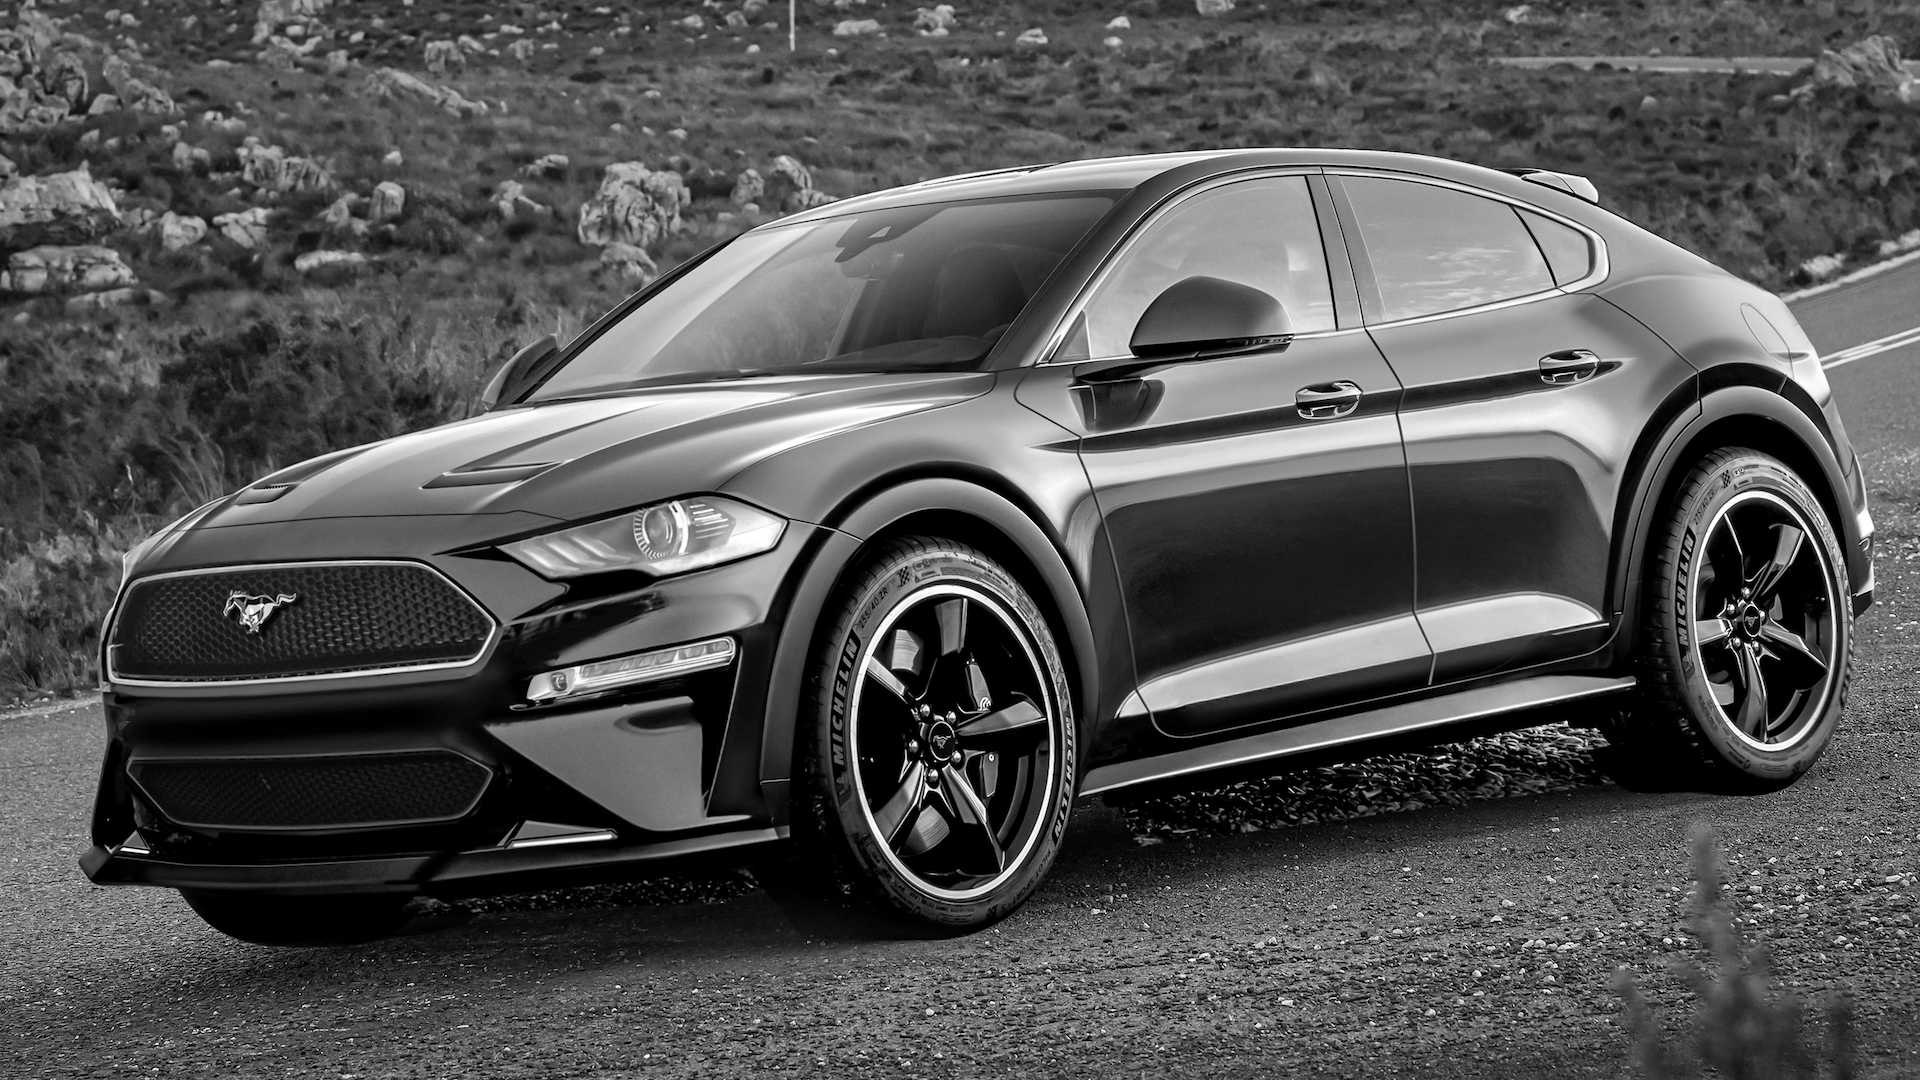 Ford's Mustang Inspired, Electric SUV Should Look A Lot Like